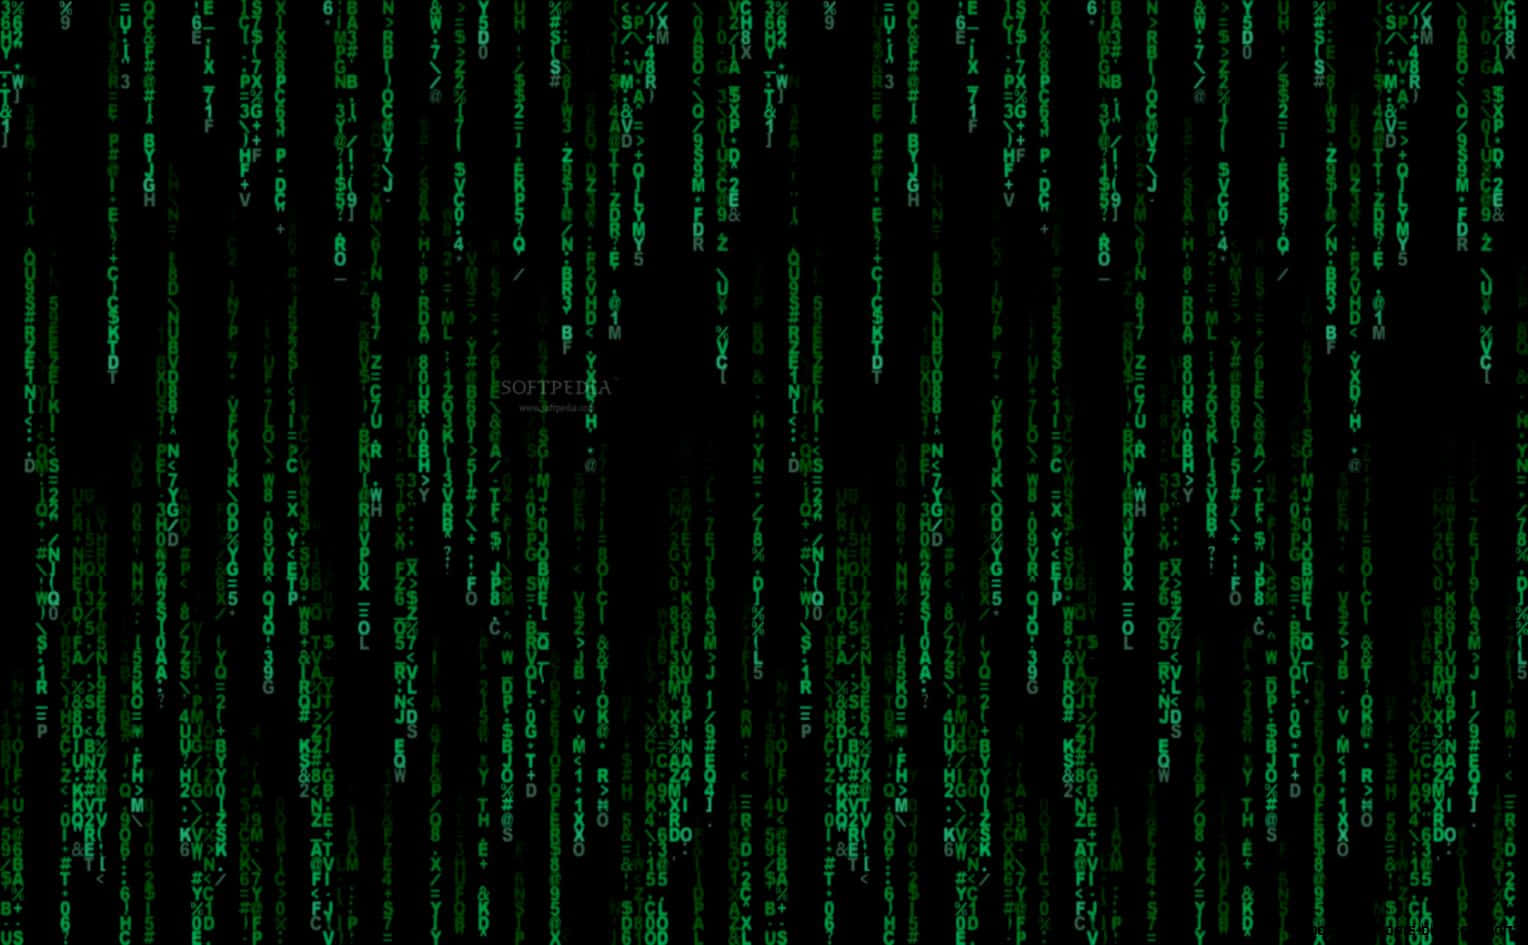 Zoom in on the Matrix